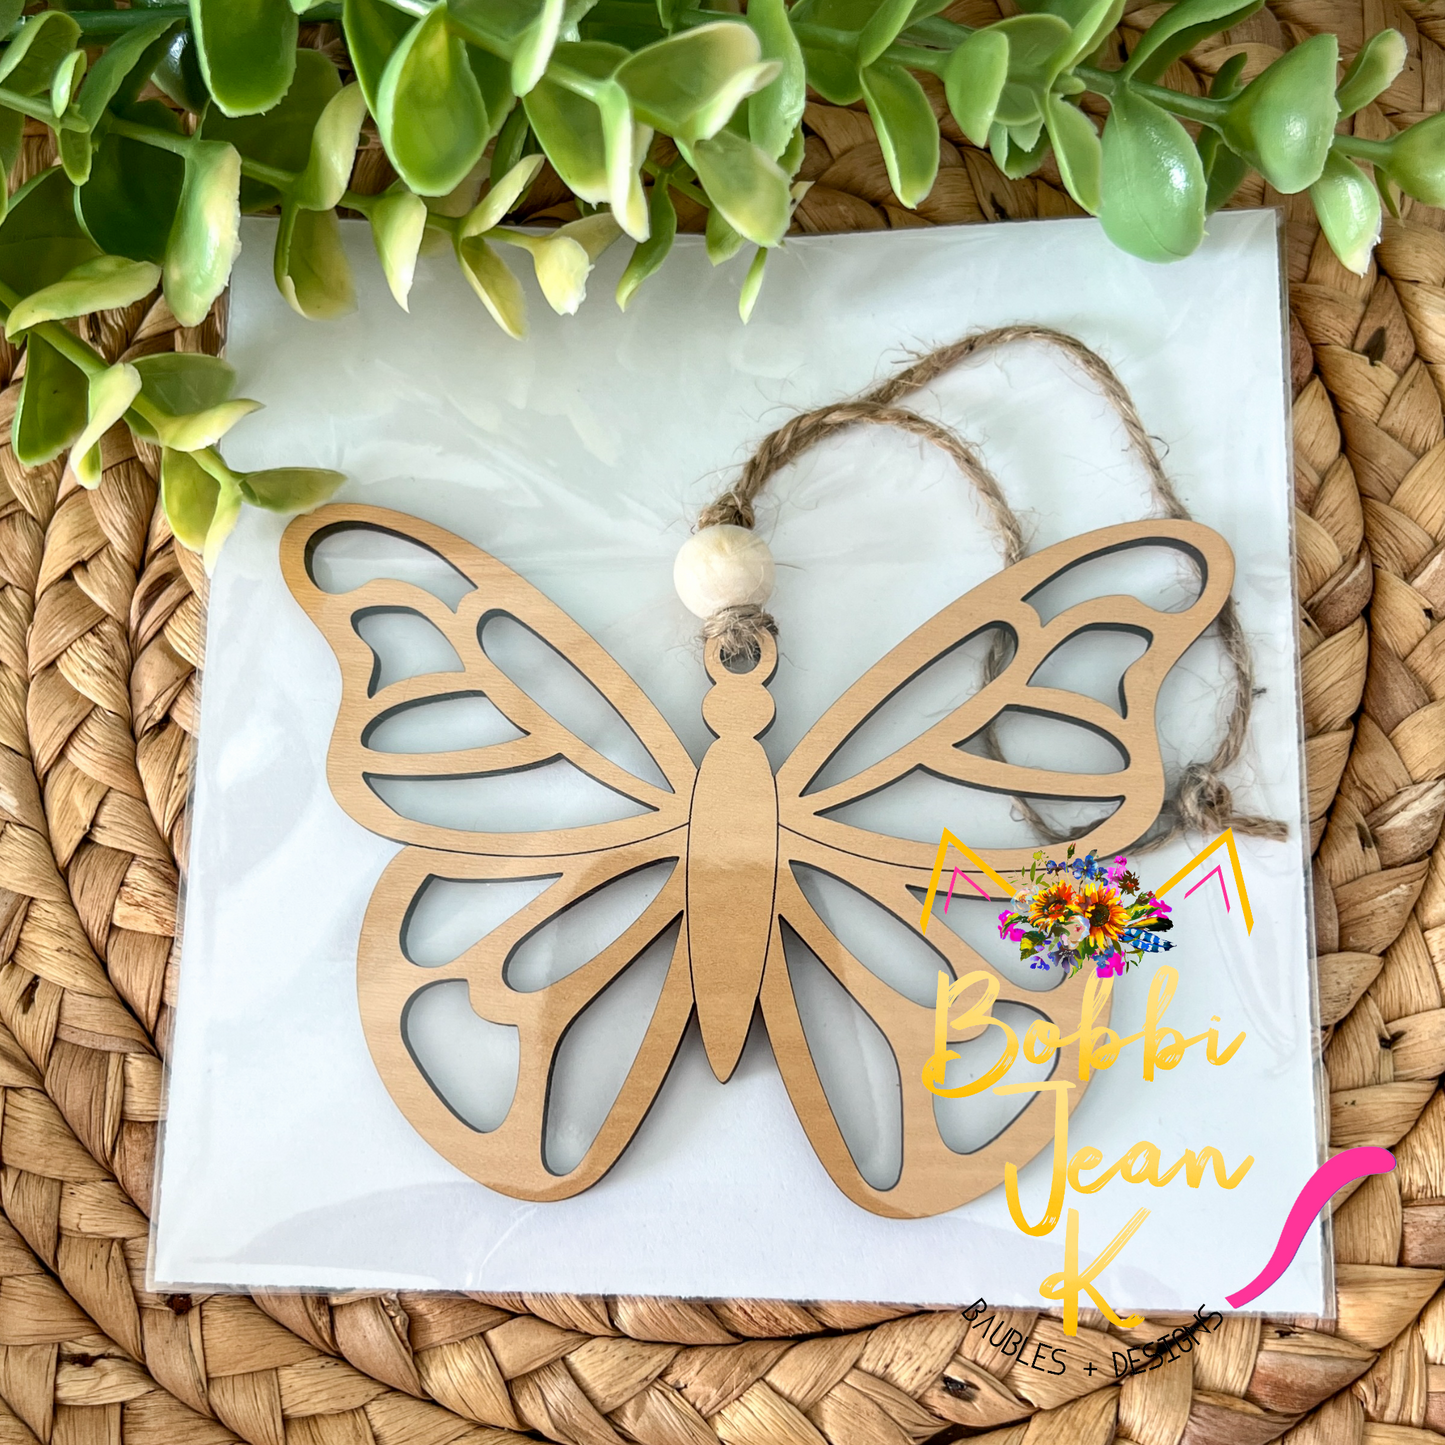 Butterfly "Spiritual Transformation" Wood Story Ornament